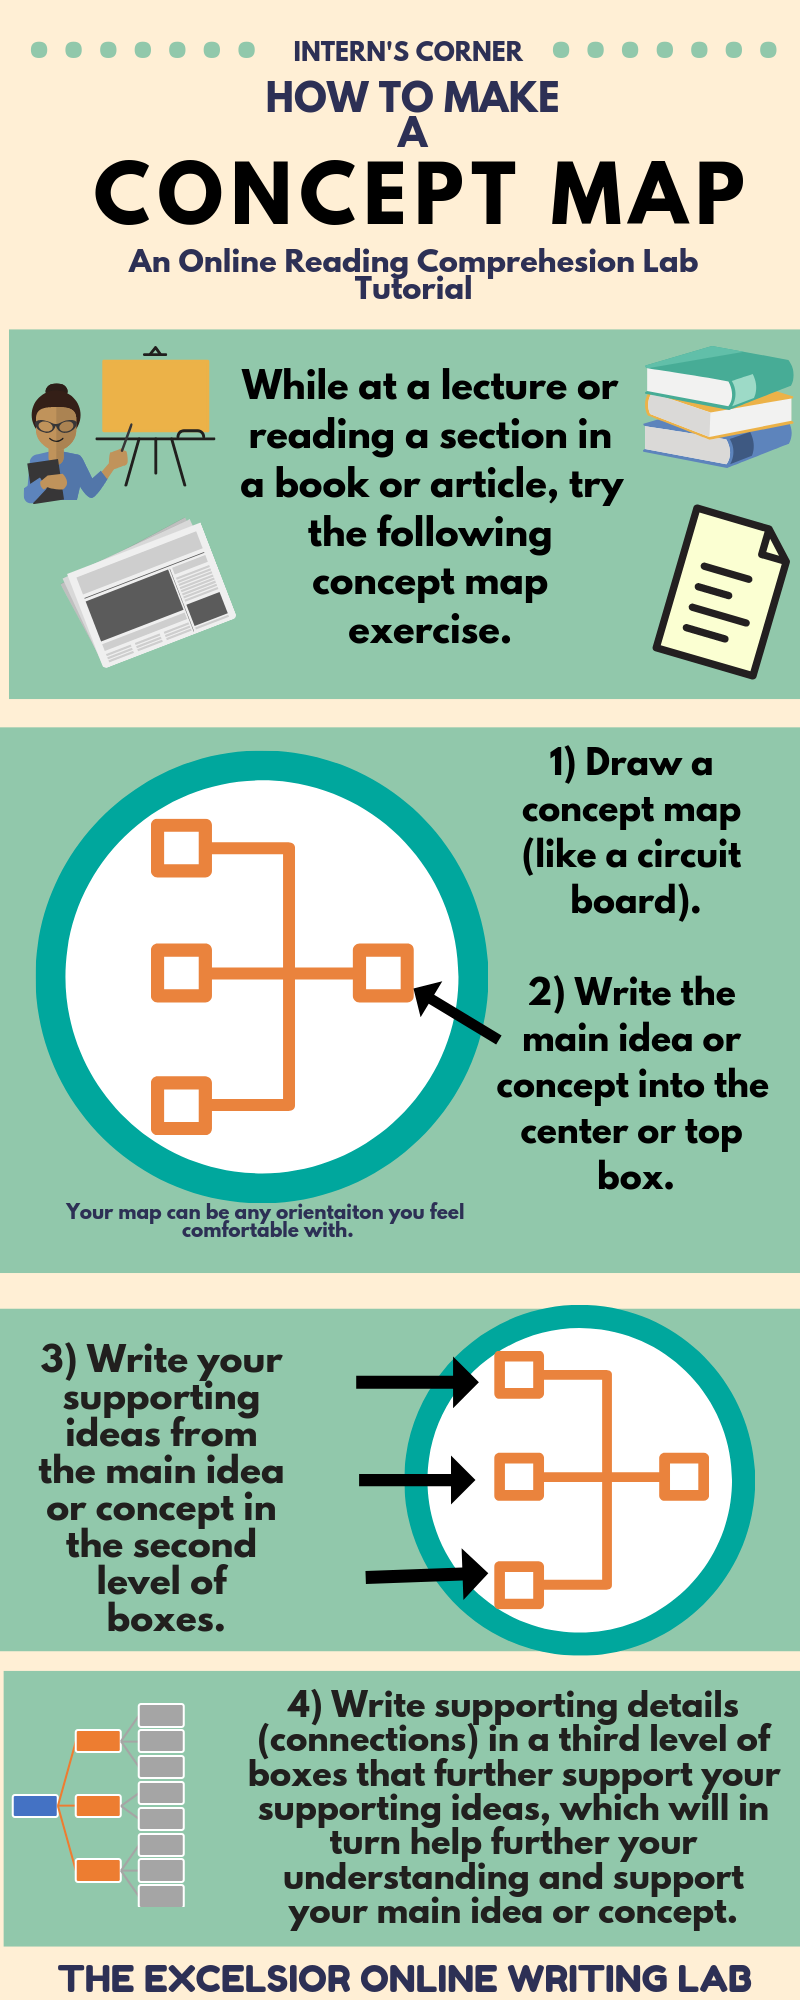 Image of infographic regarding how to generate a concept map.